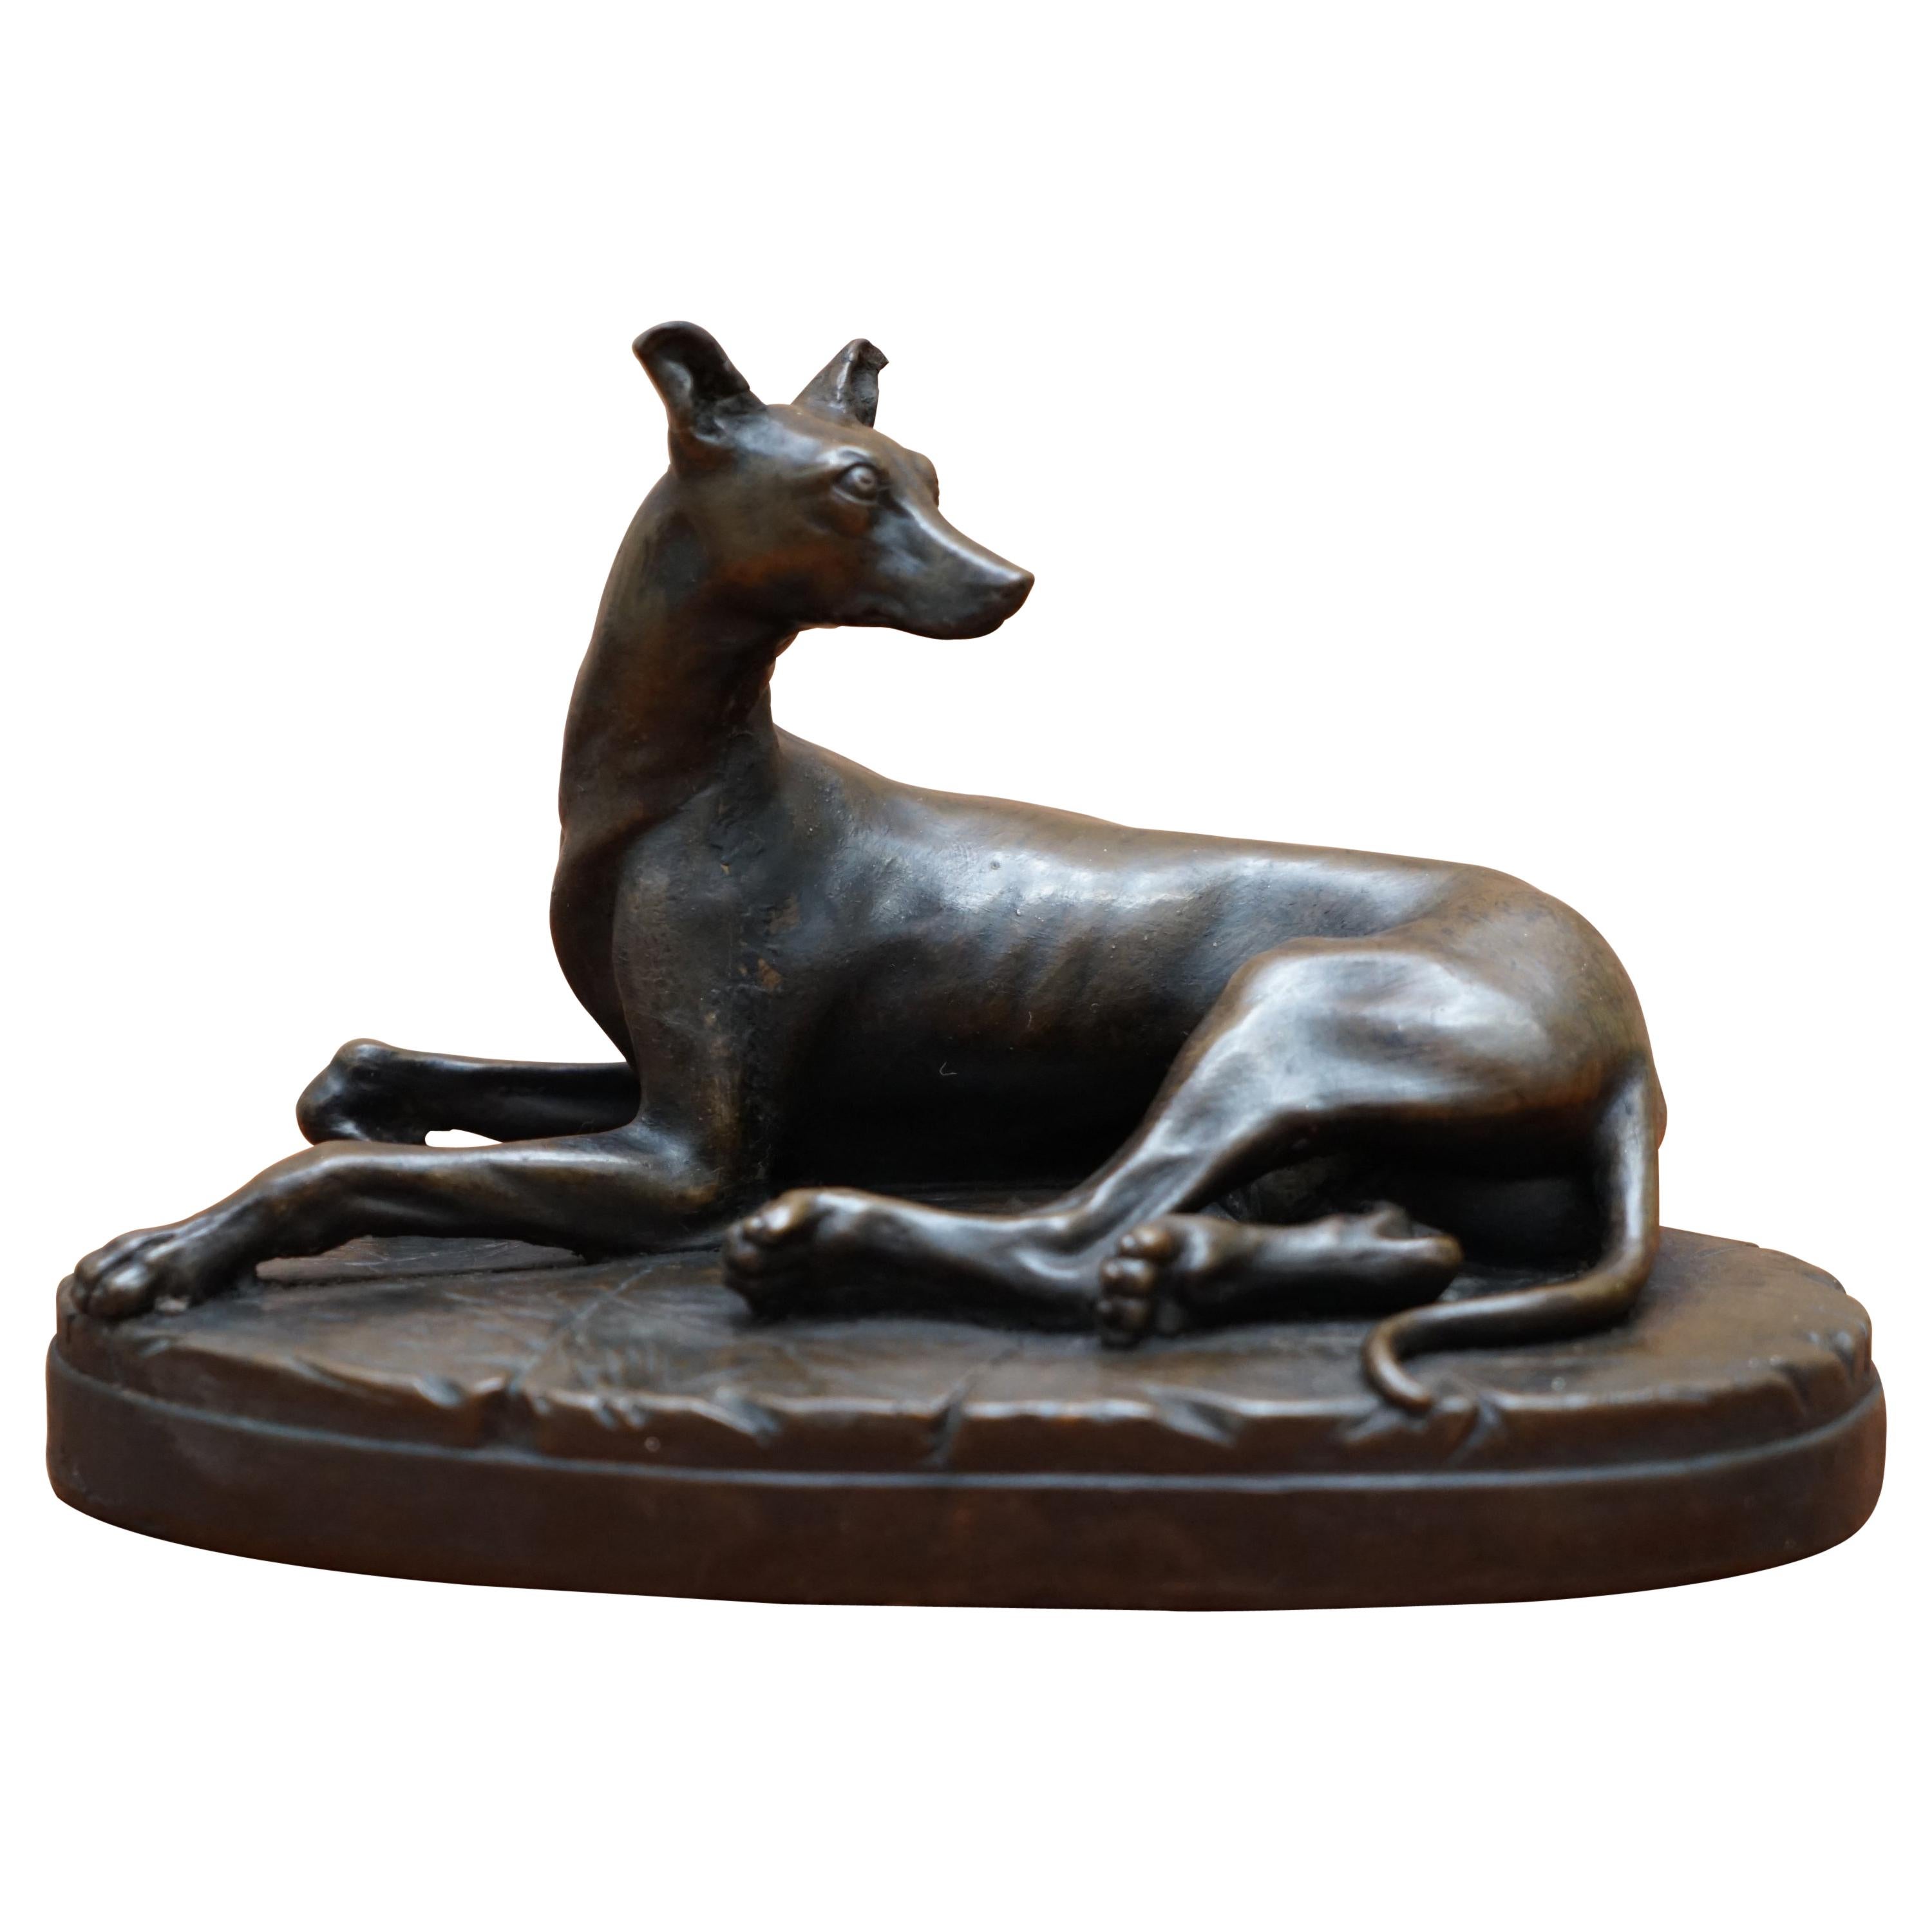 Lovely Bronze Statue of a Whippet Dog Laying Down with a Expecting Expression